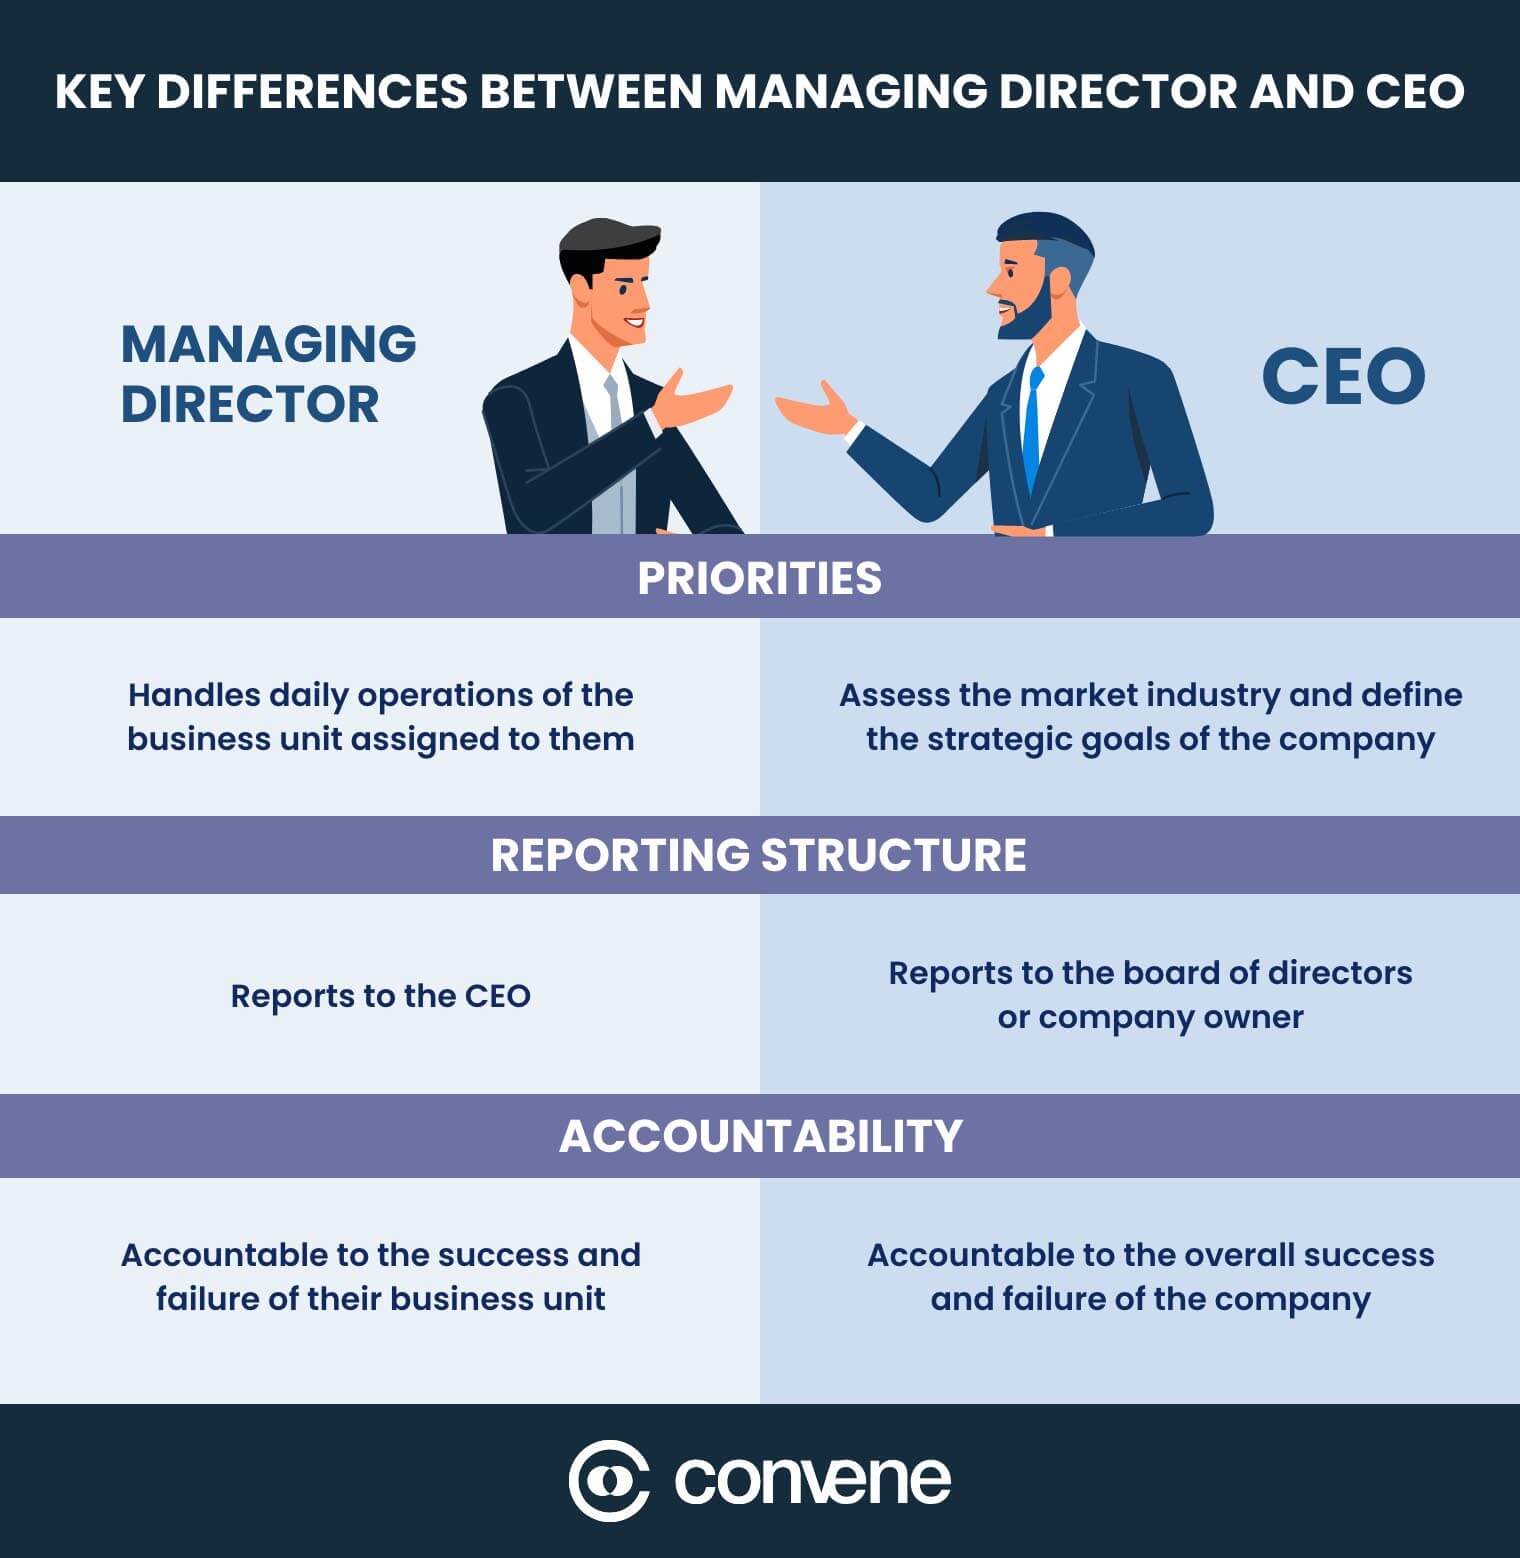 Key Differences Between Managing Director and CEO